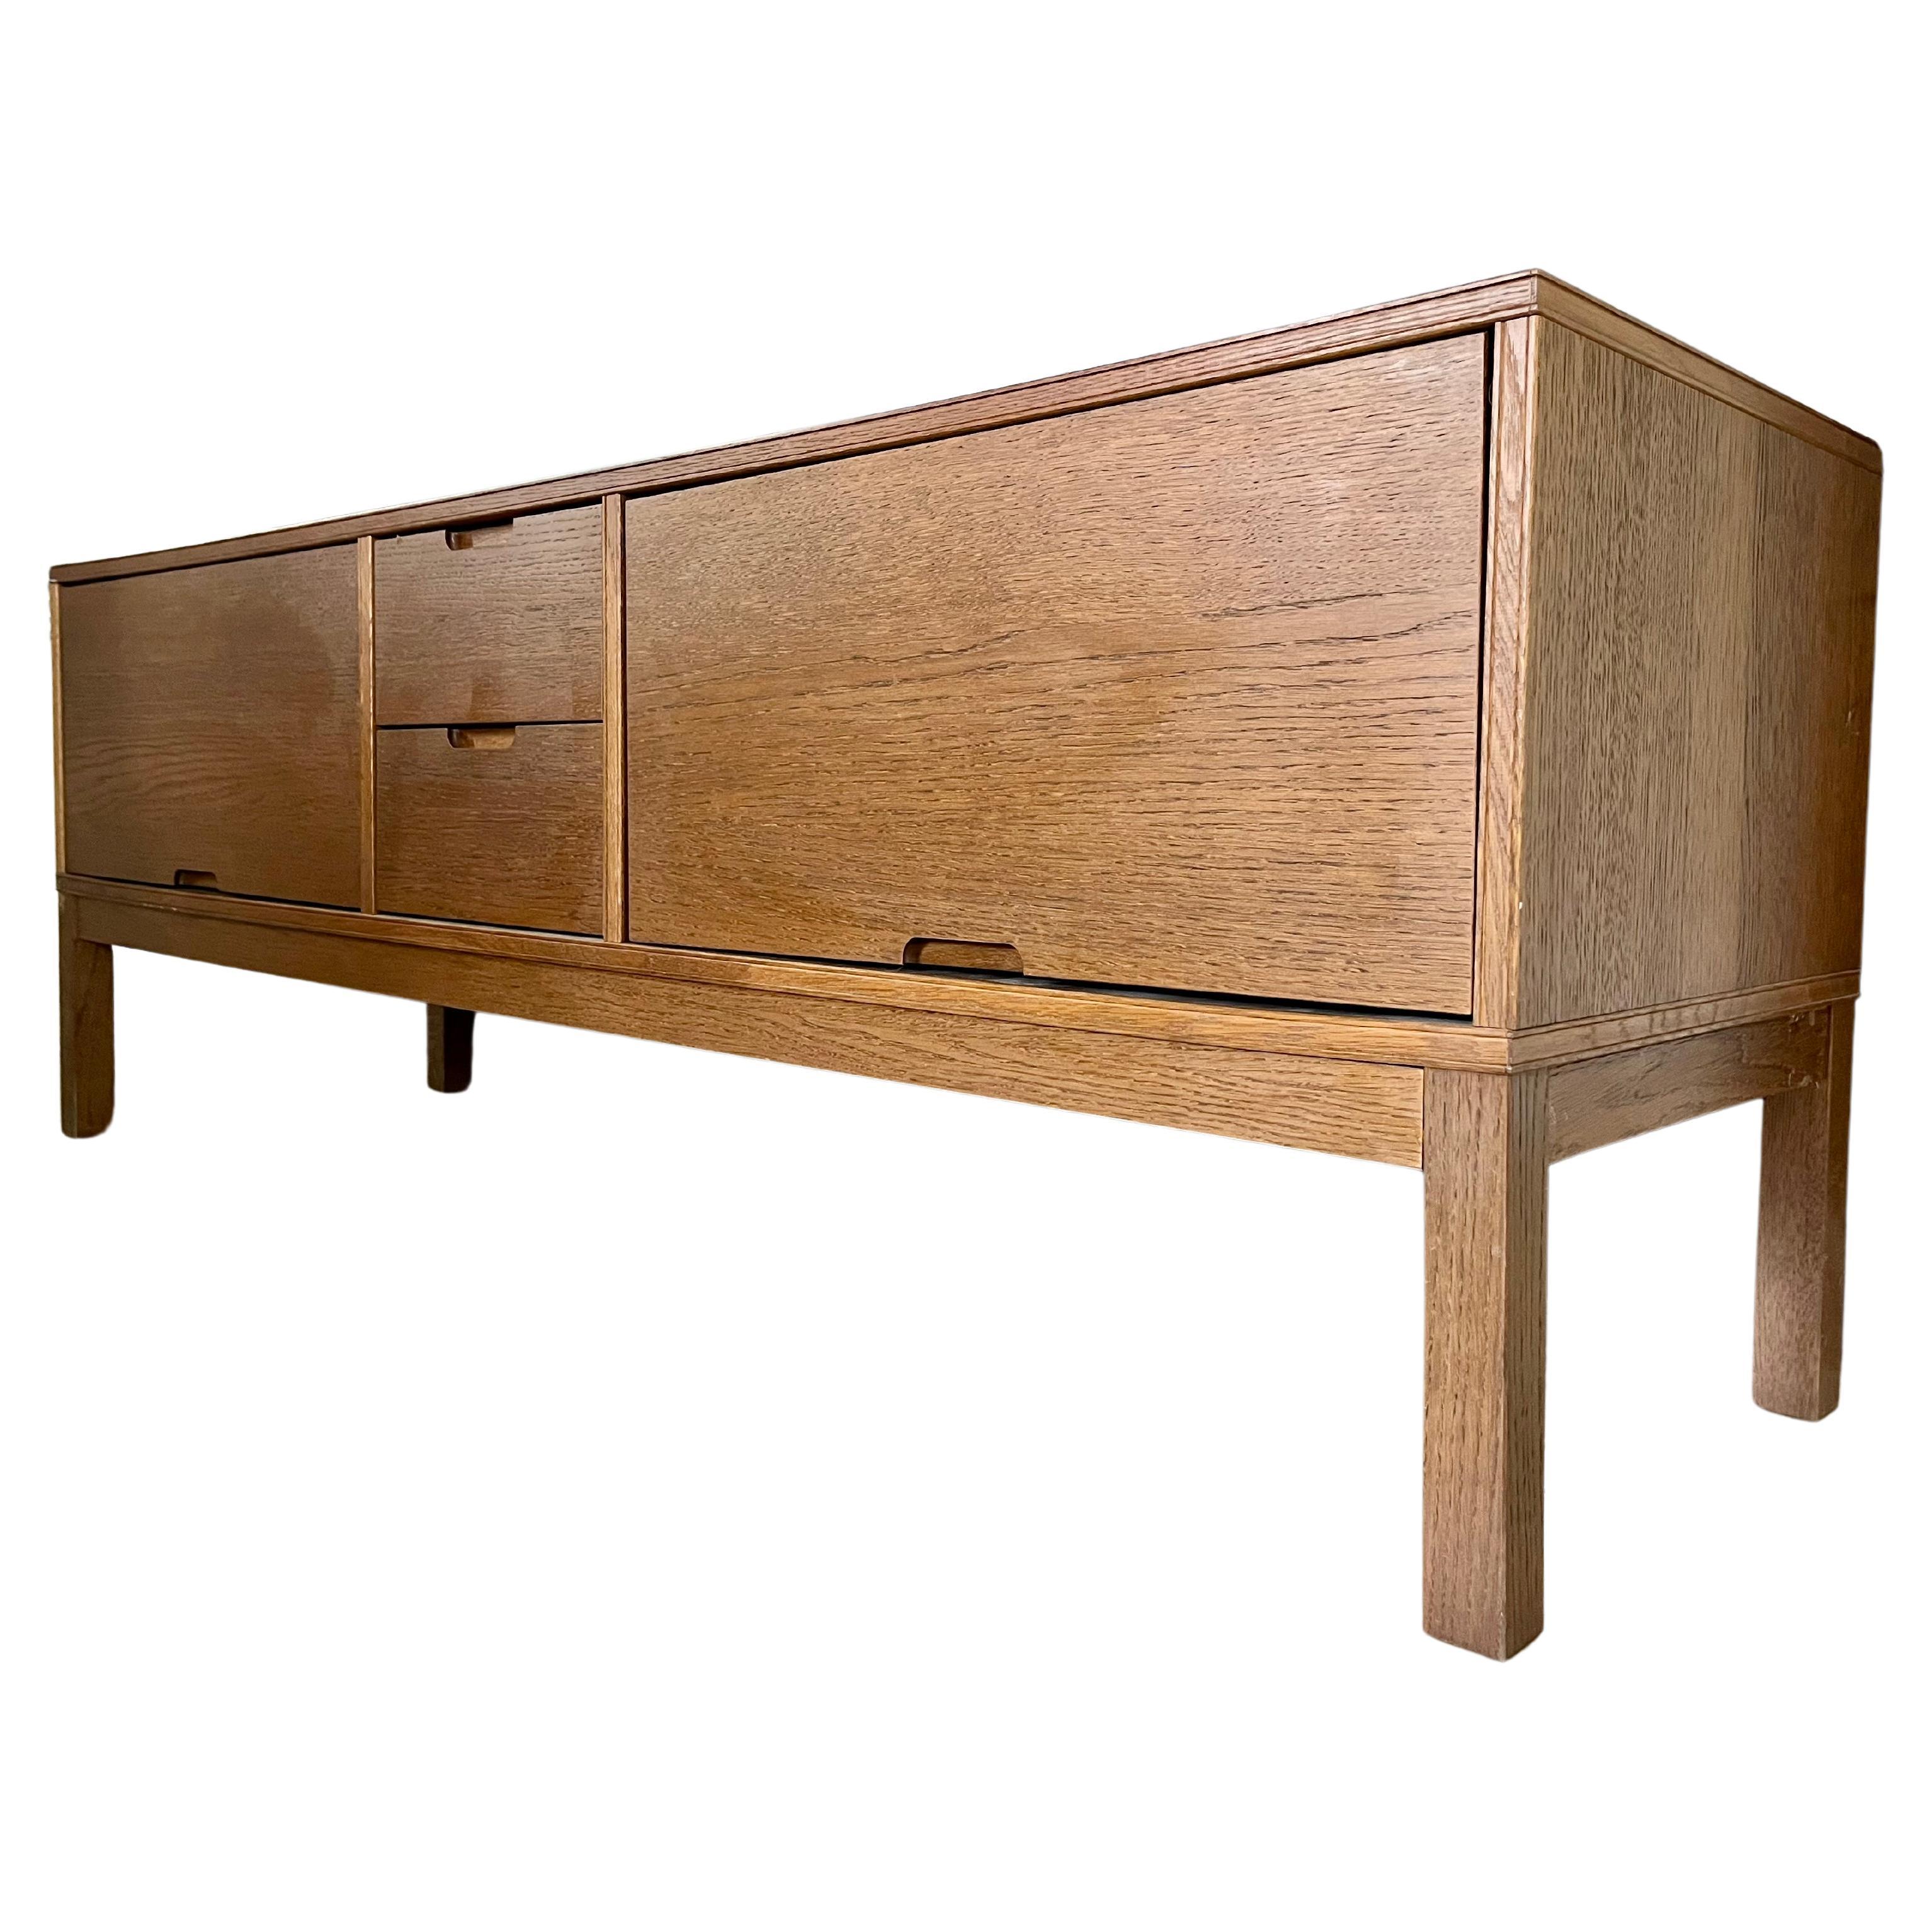  Mid Century Modern Scandinavian TV Stand Media Cabinet by IKEA.Circa 1980s  For Sale